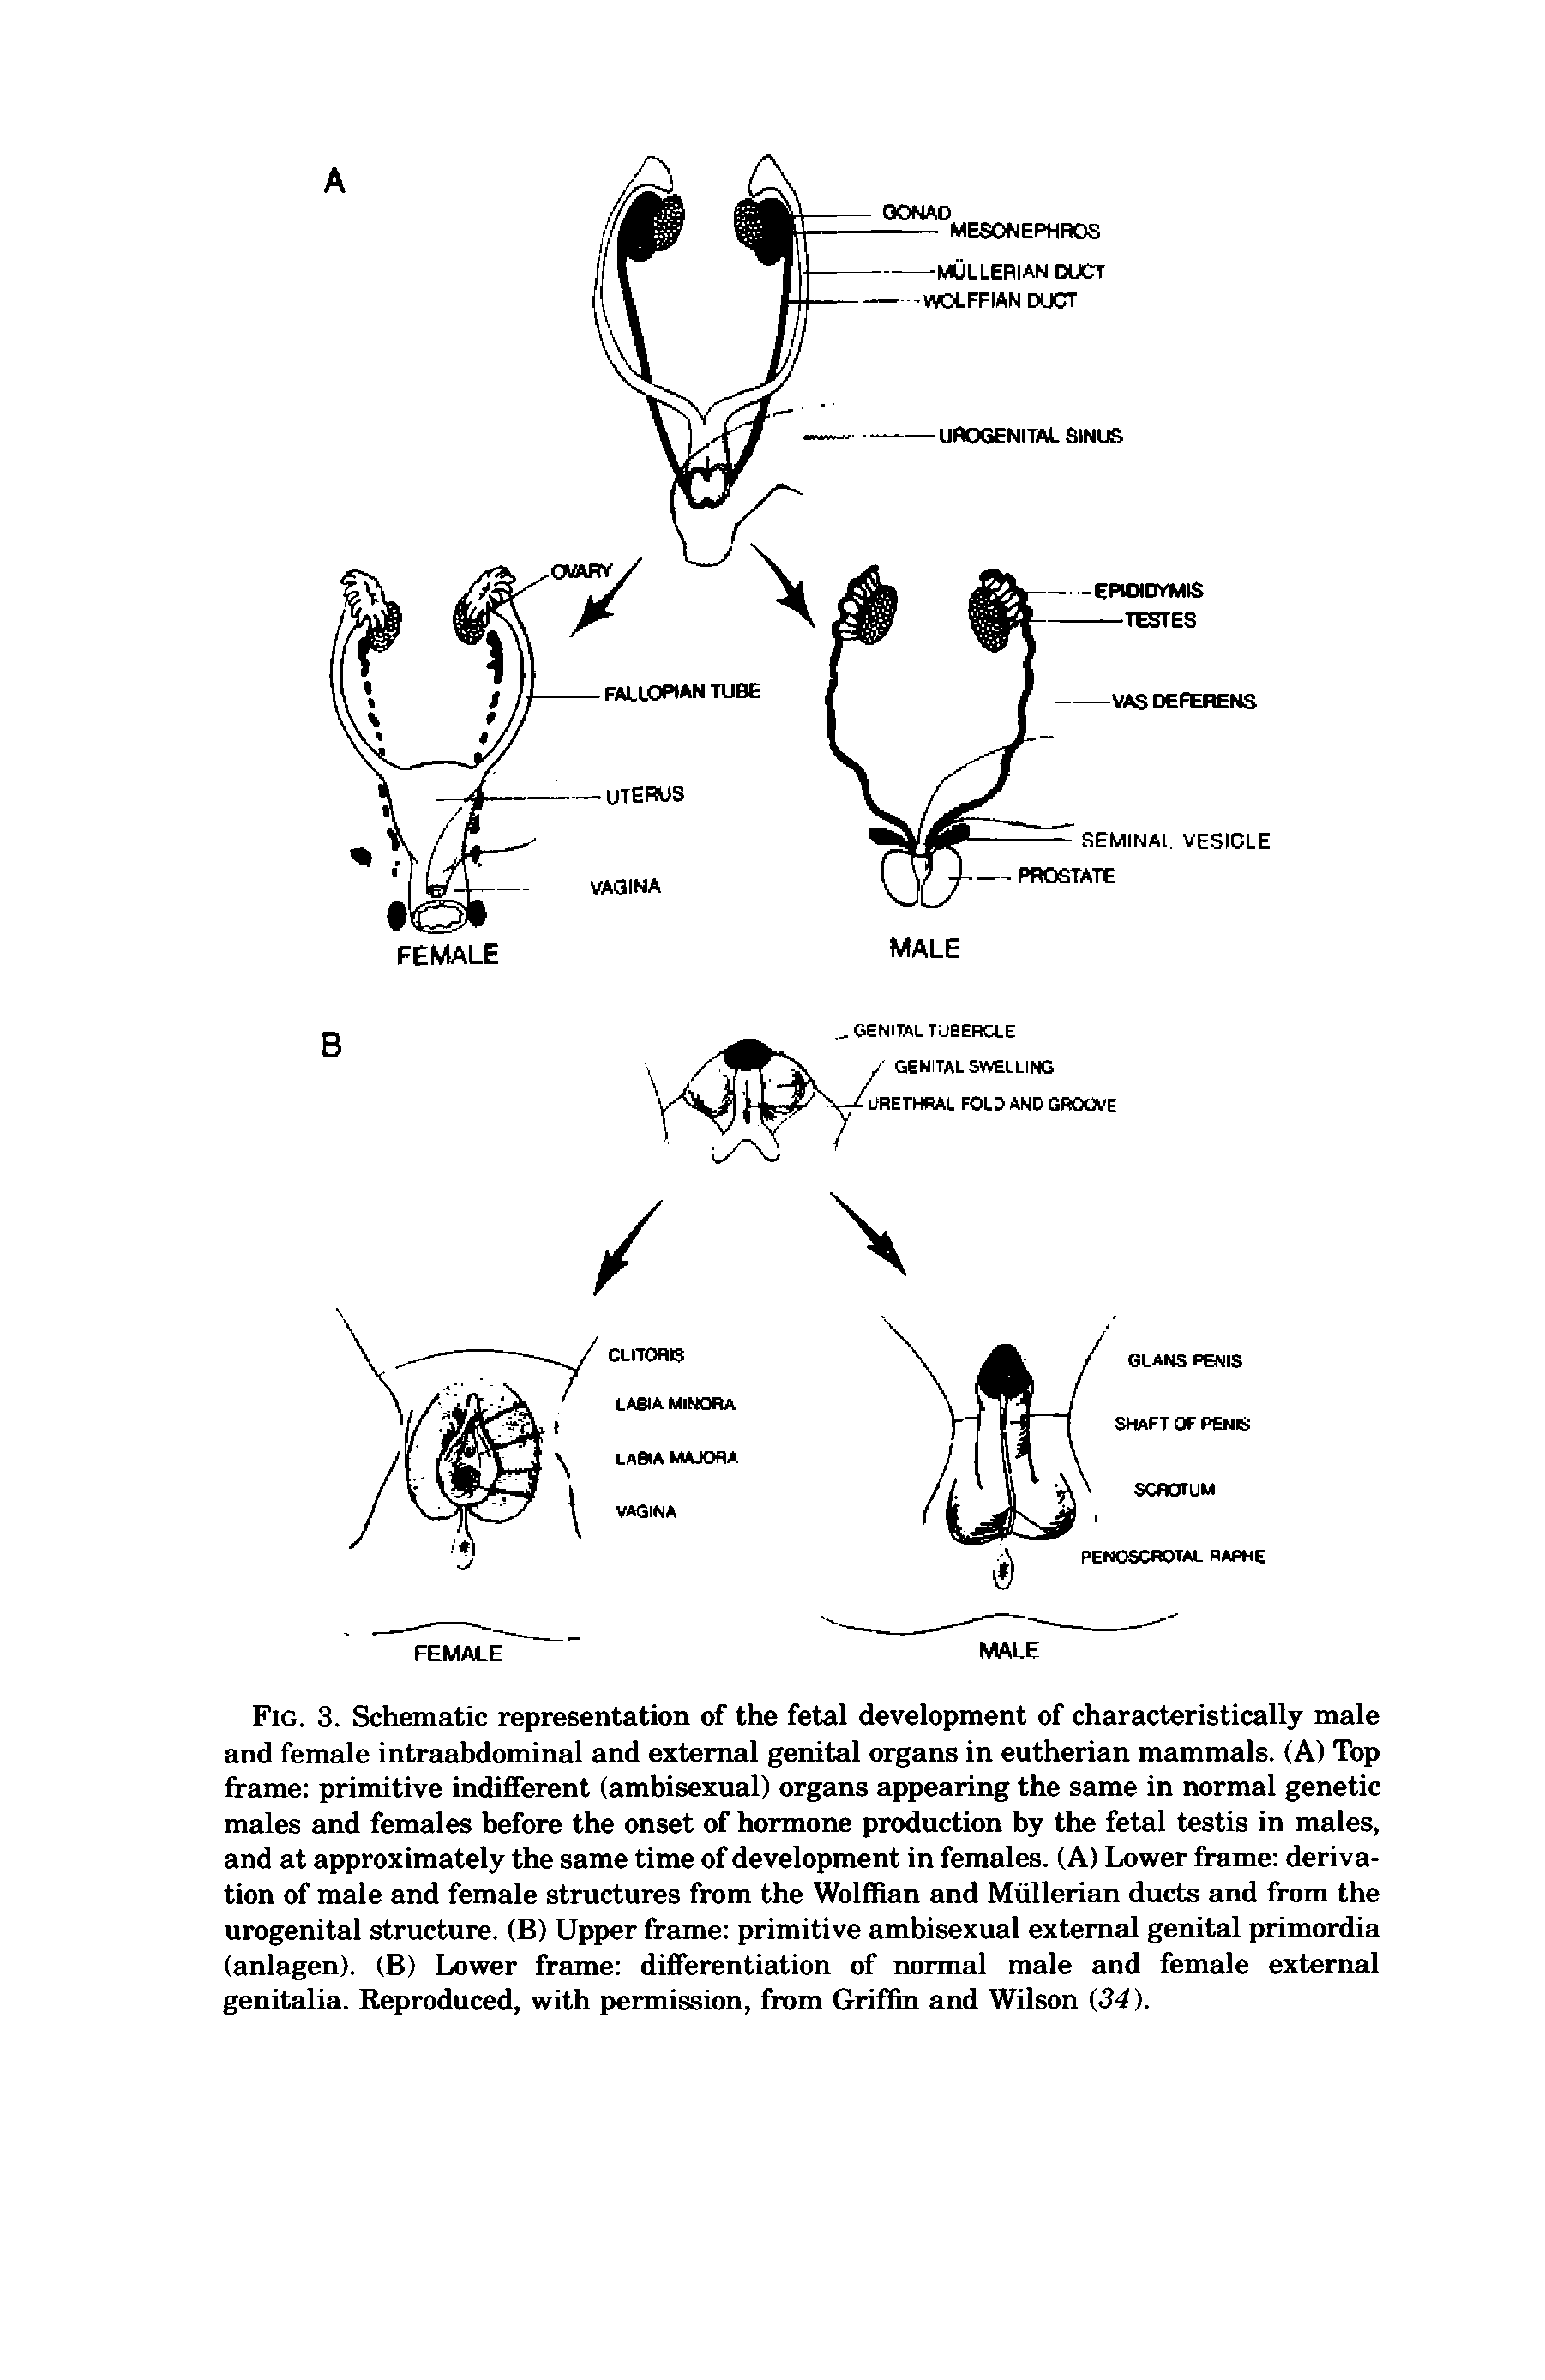 Fig. 3. Schematic representation of the fetal development of characteristically male and female intraabdominal and external genital organs in eutherian mammals. (A) Top frame primitive indifferent (ambisexual) organs appearing the same in normal genetic males and females before the onset of hormone production by the fetal testis in males, and at approximately the same time of development in females. (A) Lower frame derivation of male and female structures from the Wolffian and Mullerian ducts and from the urogenital structure. (B) Upper frame primitive ambisexual external genital primordia (anlagen). (B) Lower freune differentiation of normal male and female external genitalia. Reproduced, with permission, from Griffin and Wilson (34).